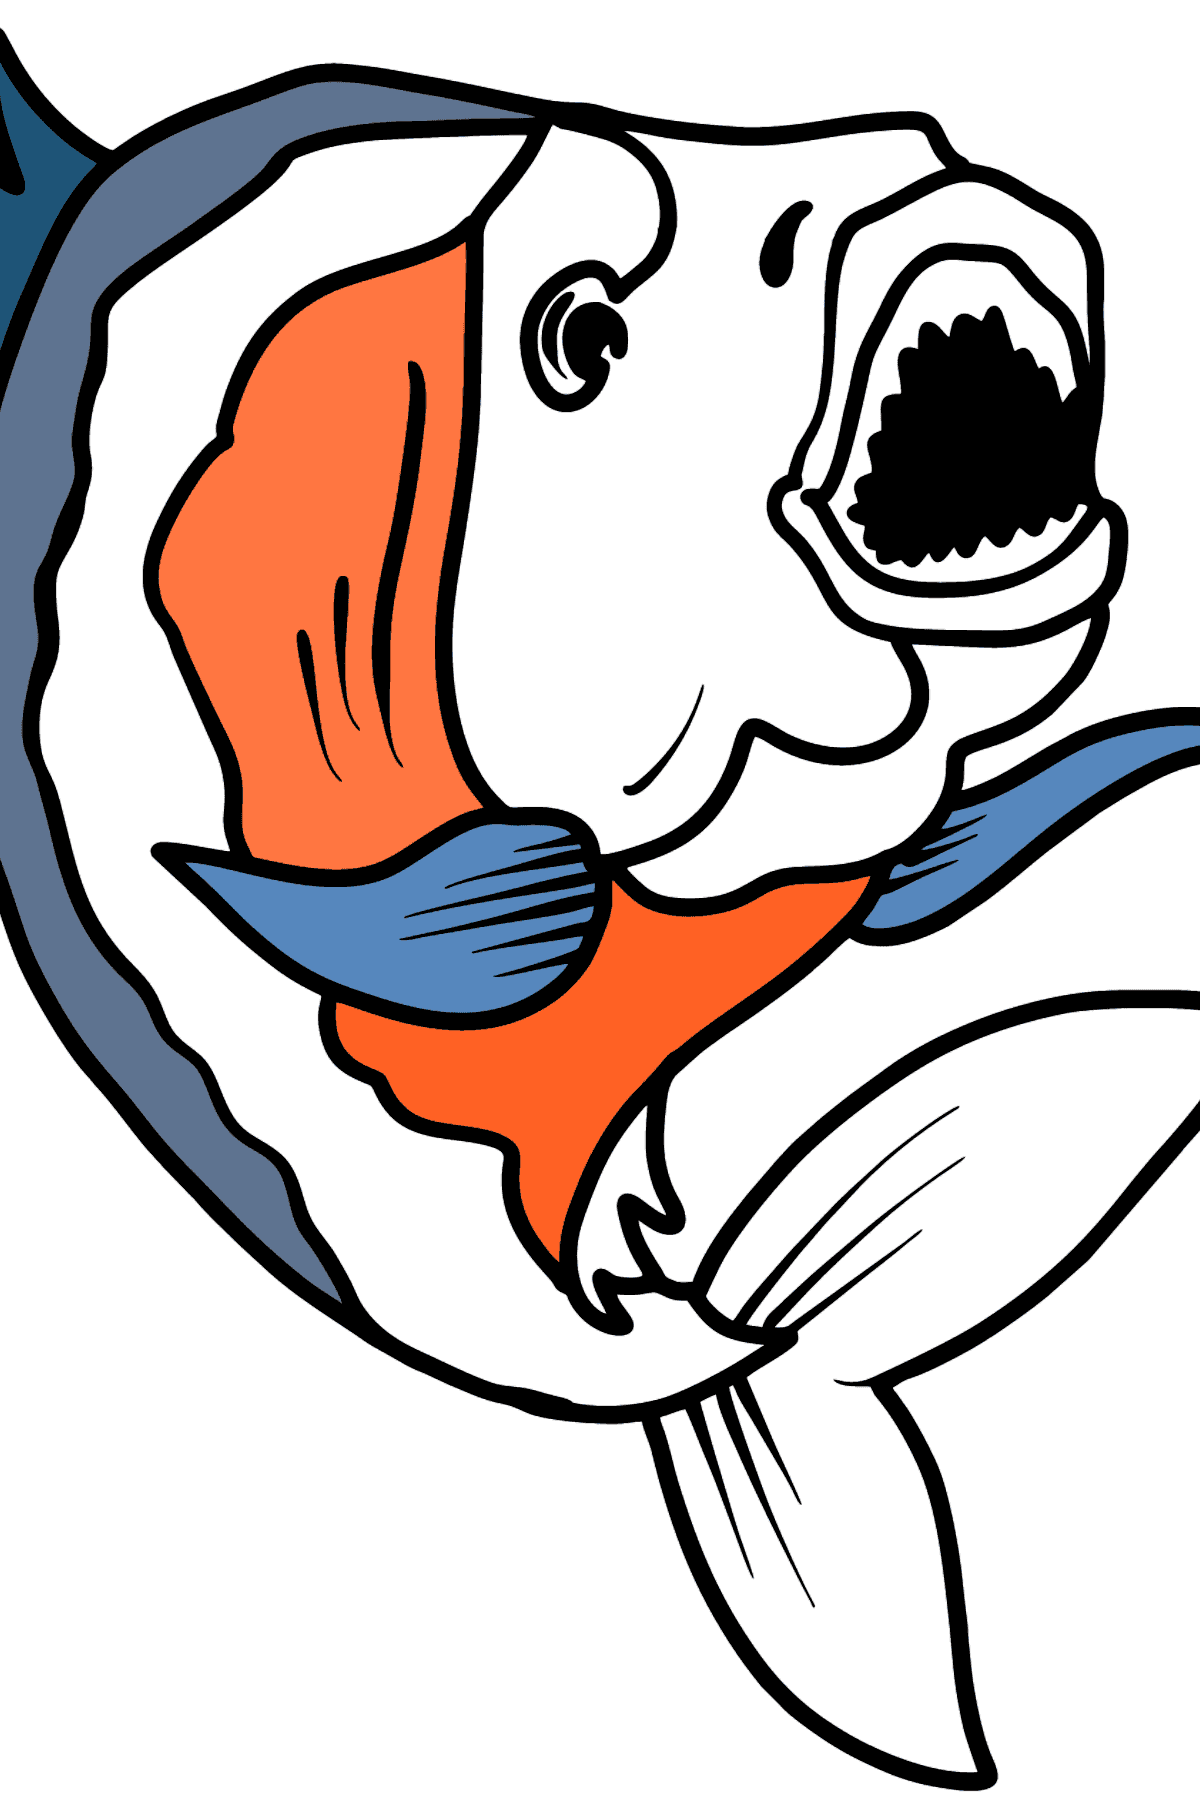 Piranha coloring page - Coloring Pages for Kids